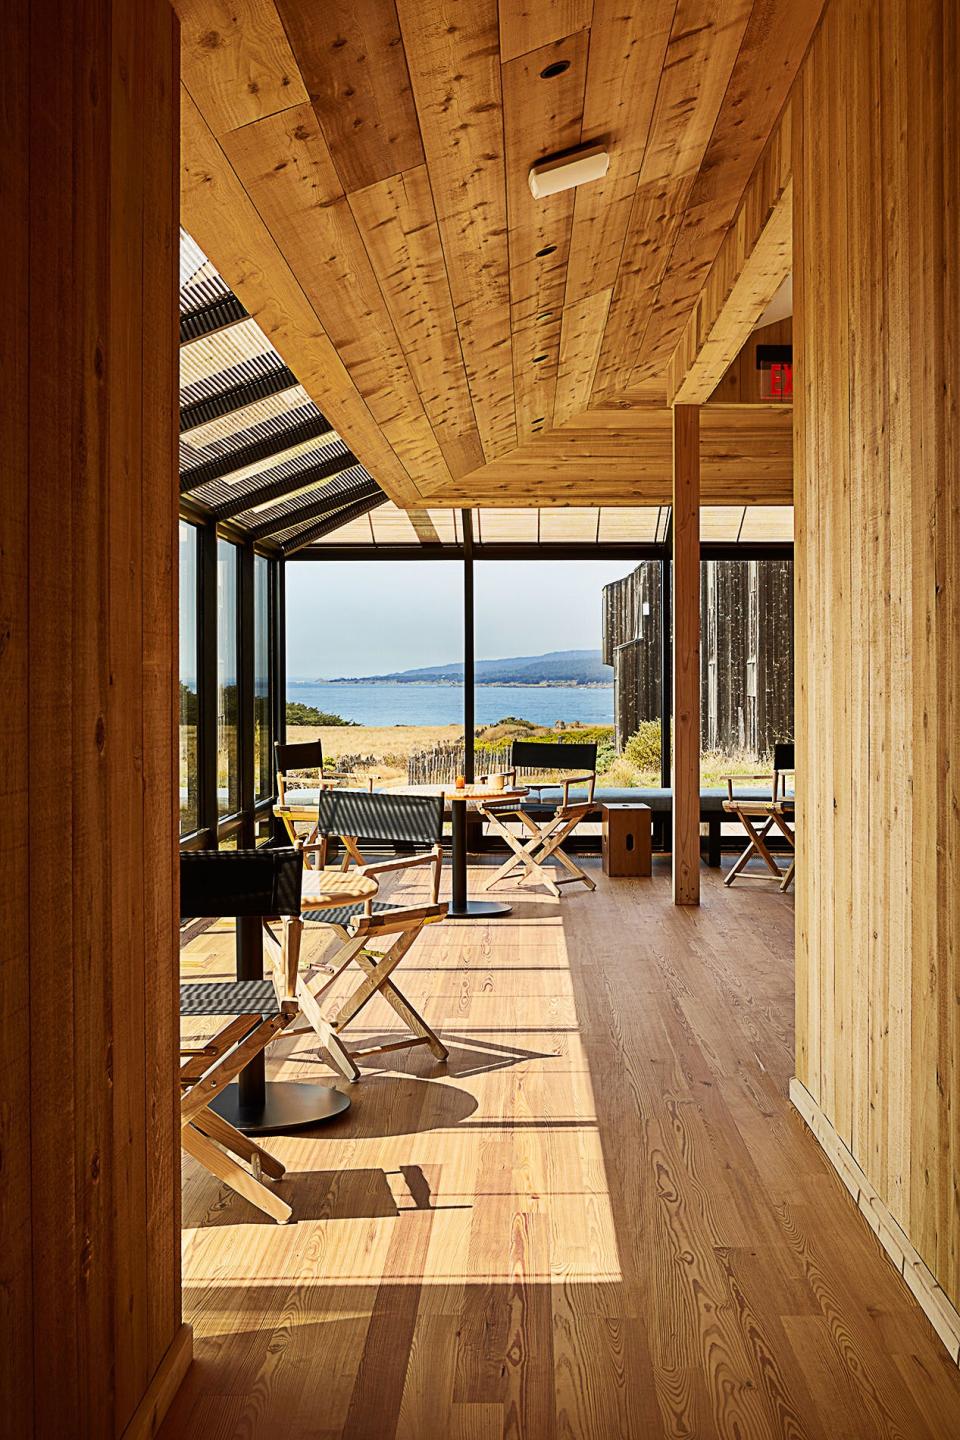 The solarium at The Sea Ranch Lodge in California, revamped by AD100 designer Charles de Lisle.